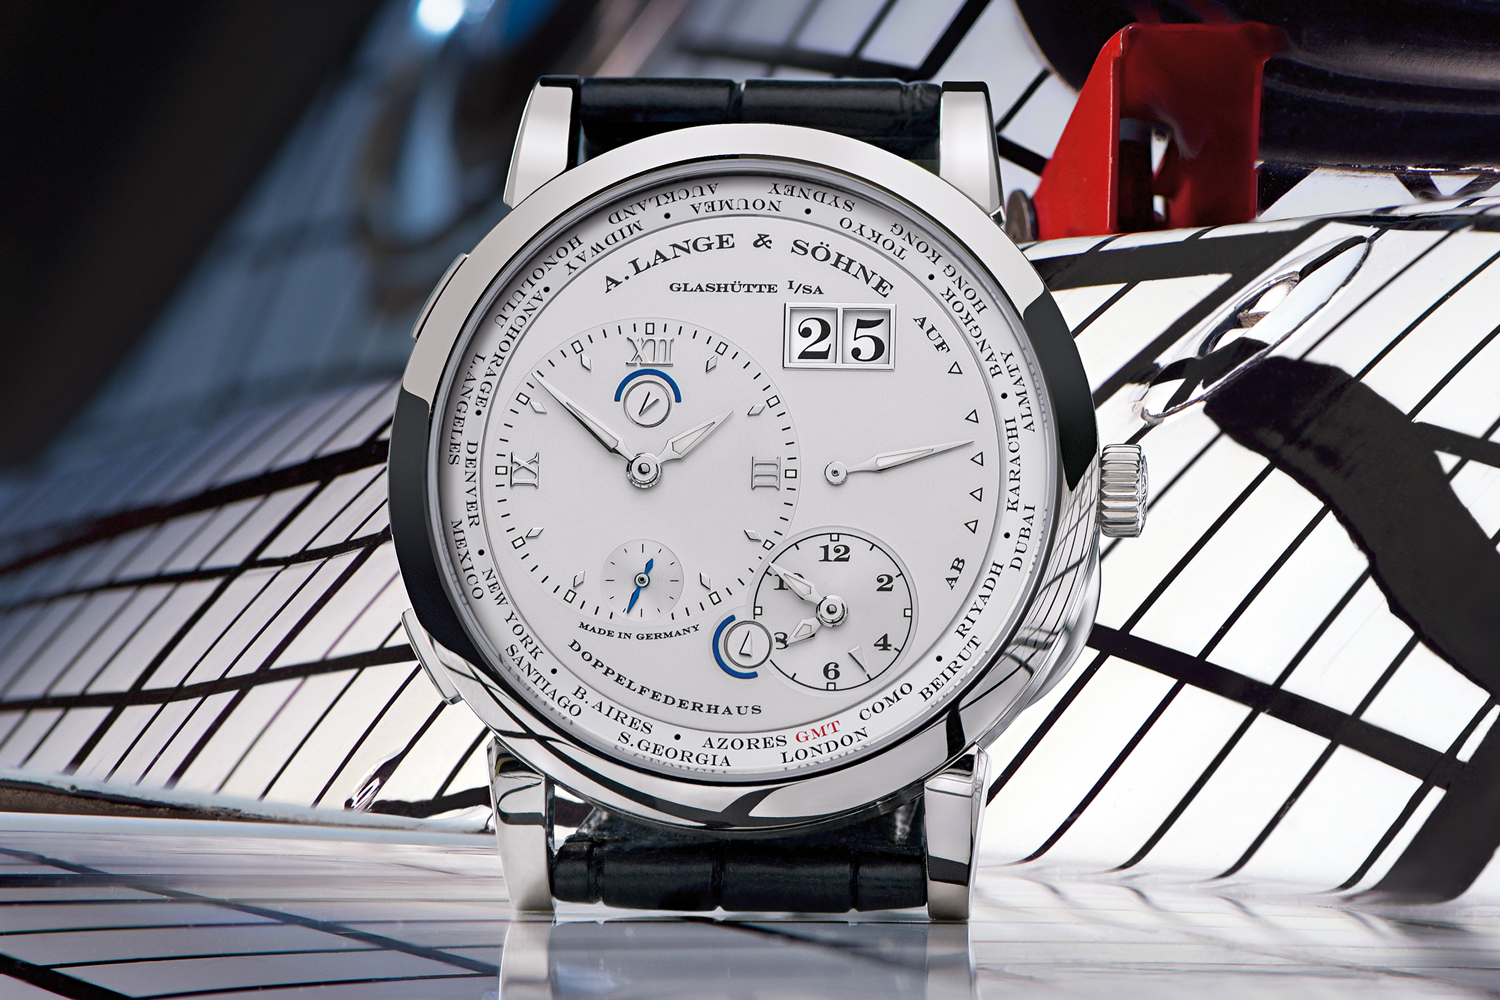 Lange 1 Time Zone “Como Edition” (Ref 116.049) was awarded to the “Best of Show” winner at the Concorso d’Eleganza Villa d’Este since 2012 with the exception of last year due to pandemic. Each timepiece is one of a kind, with a unique case back inscribing the year of the event